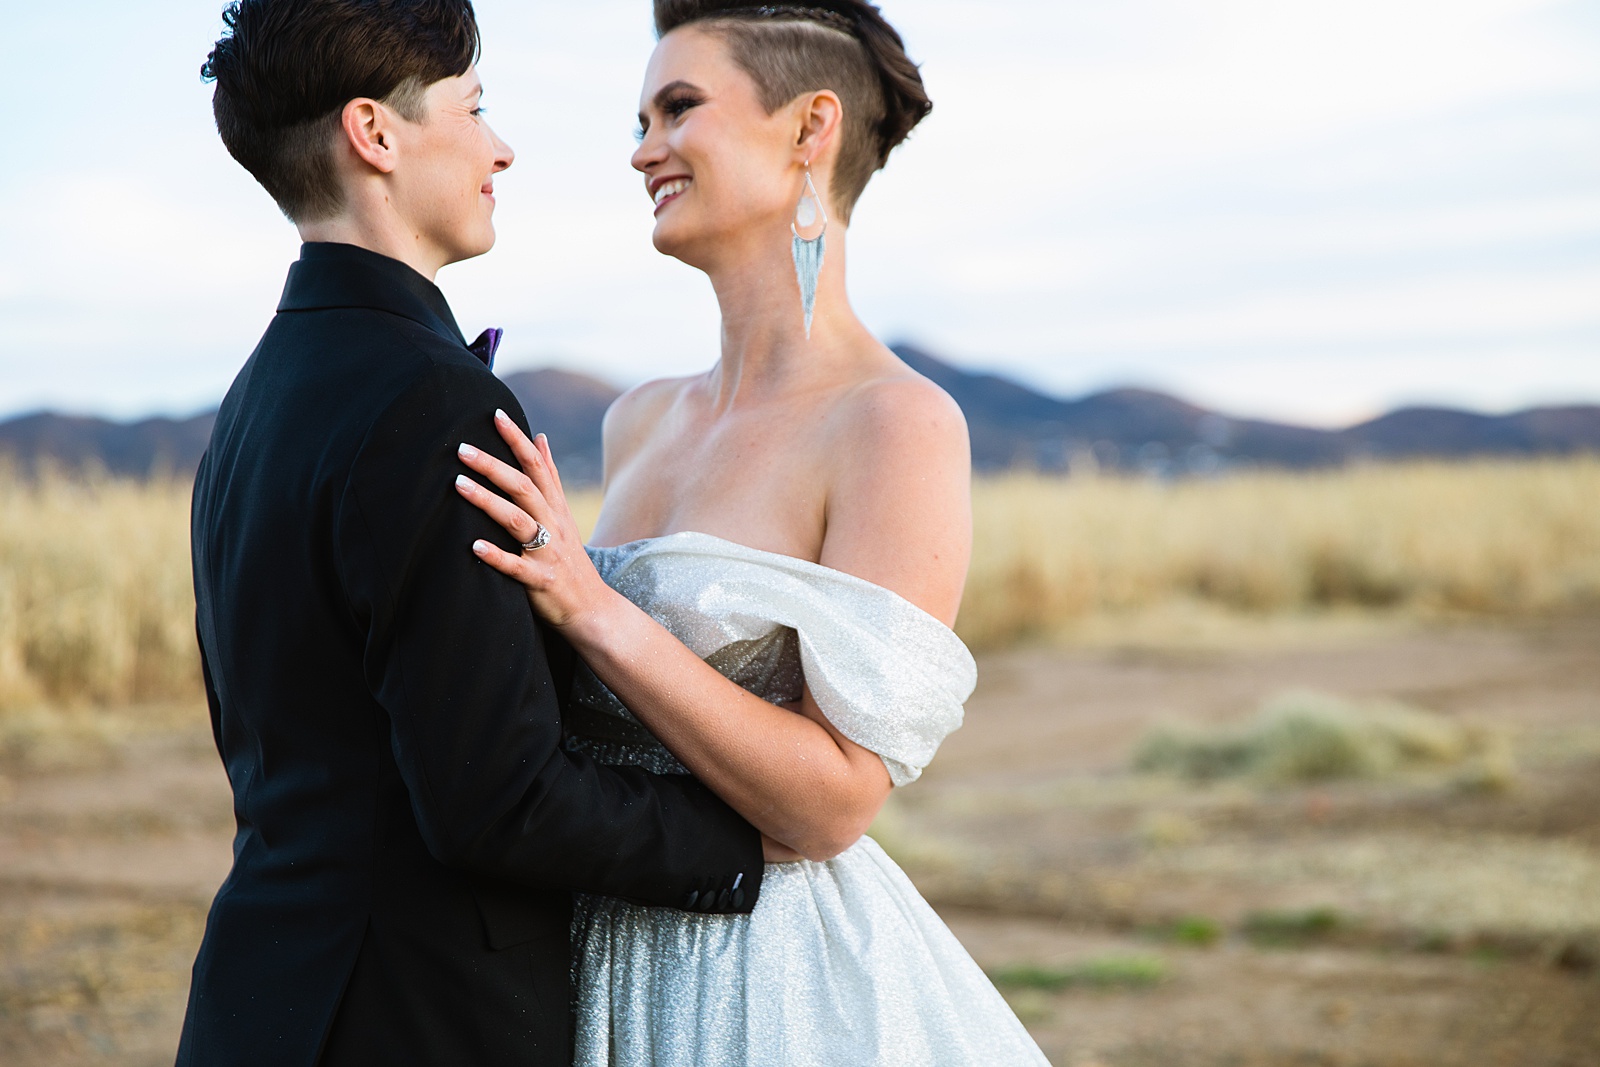 Same sex couple's first look at Mortimer Farms by Arizona wedding photographer PMA Photography.